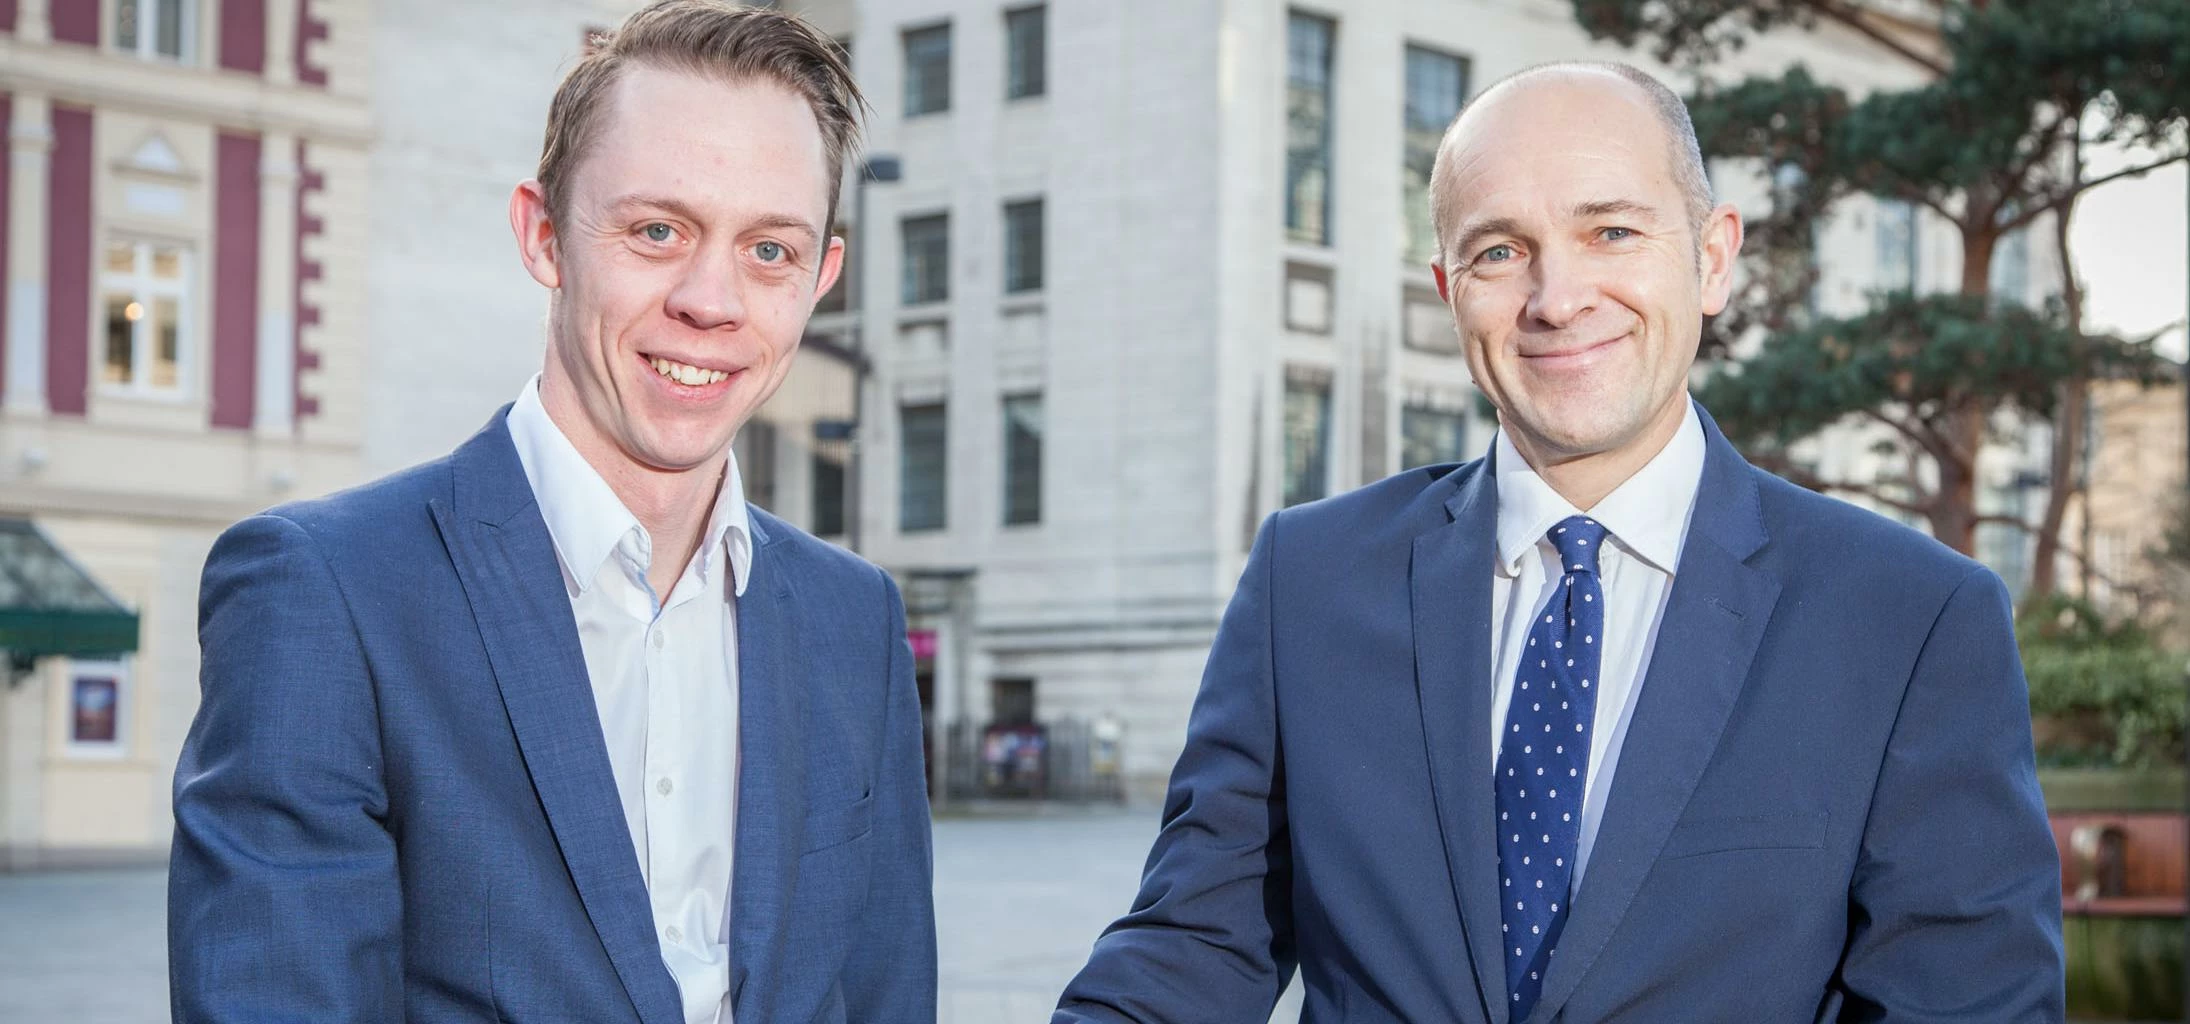 Taylor&Emmet's new partner and head of employment law, Tom Draper (left), is congratulated on his pr